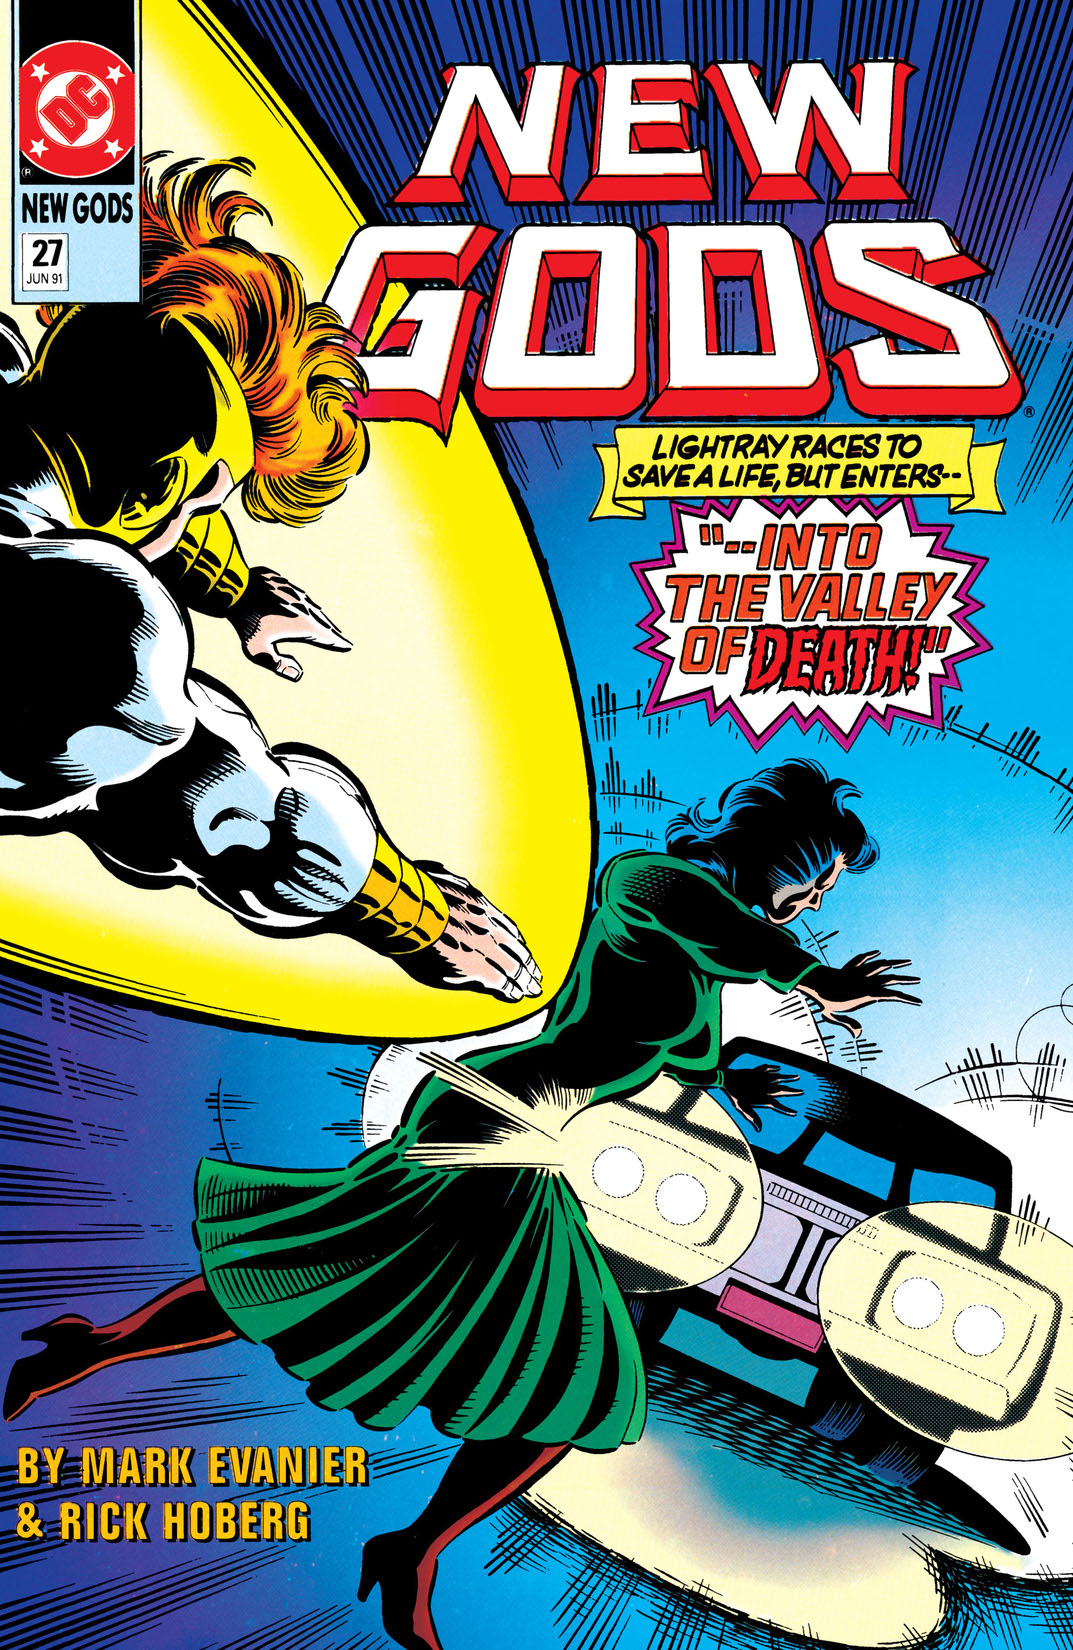 New Gods (1989-1991) #27 preview images